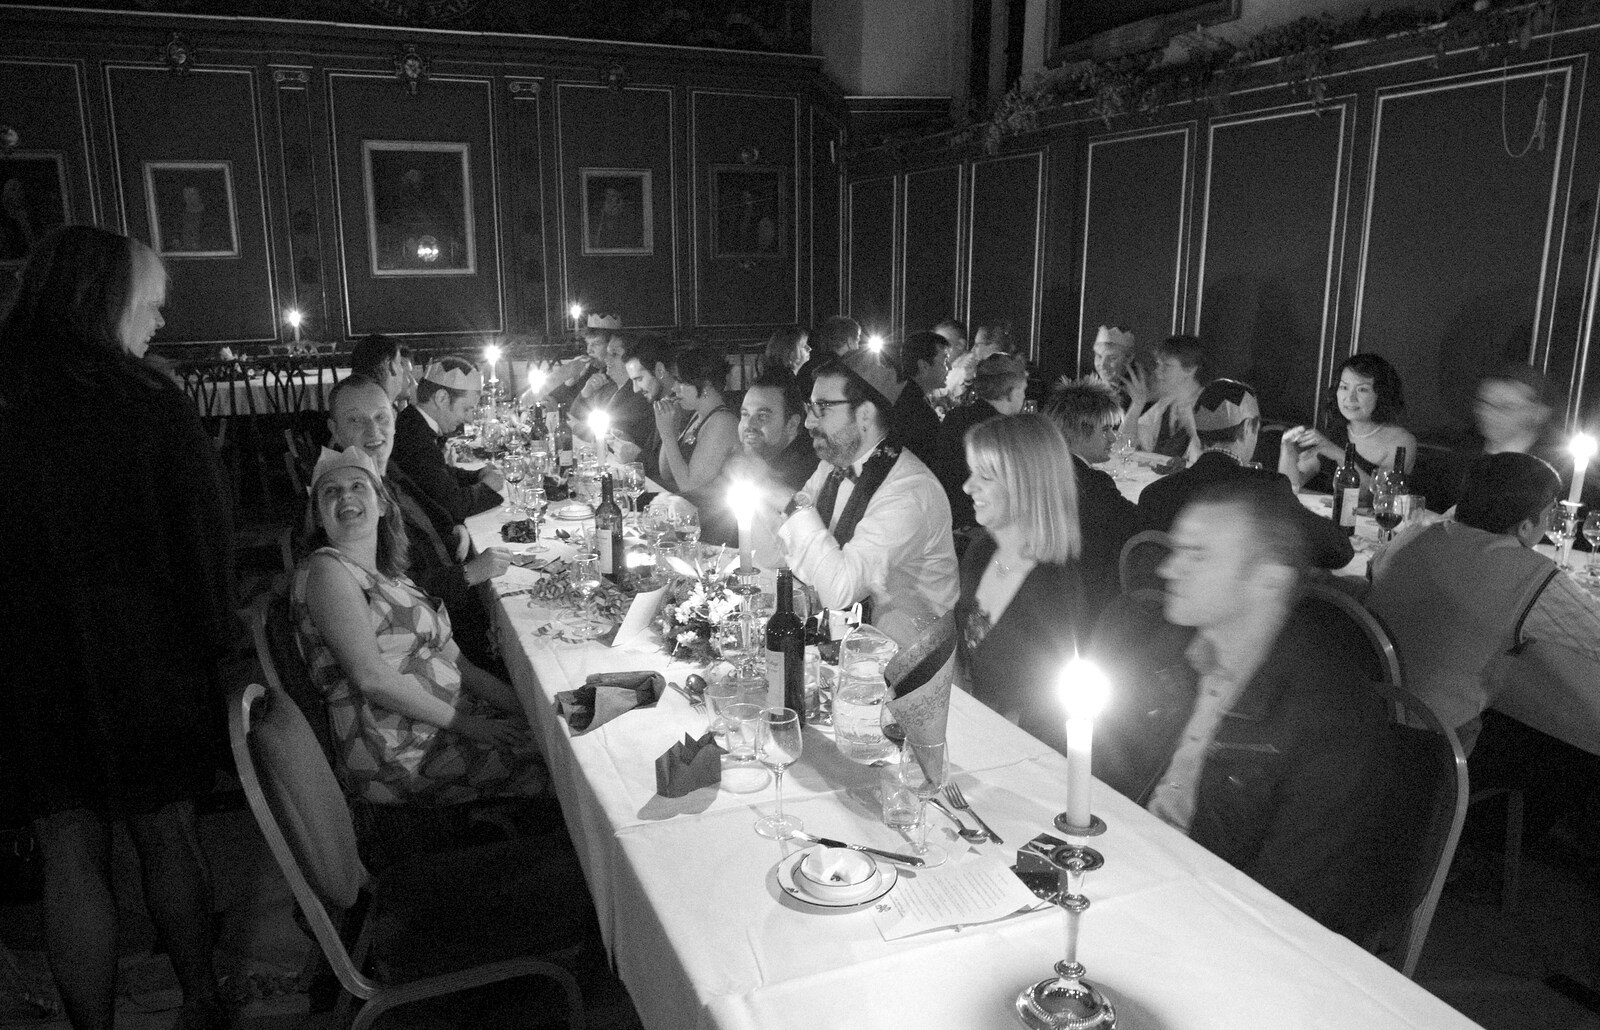 Candle-lit dinner in Magdalene College from Thornham Crafts and a Qualcomm Christmas, Cambridge and Suffolk - 10th December 2012